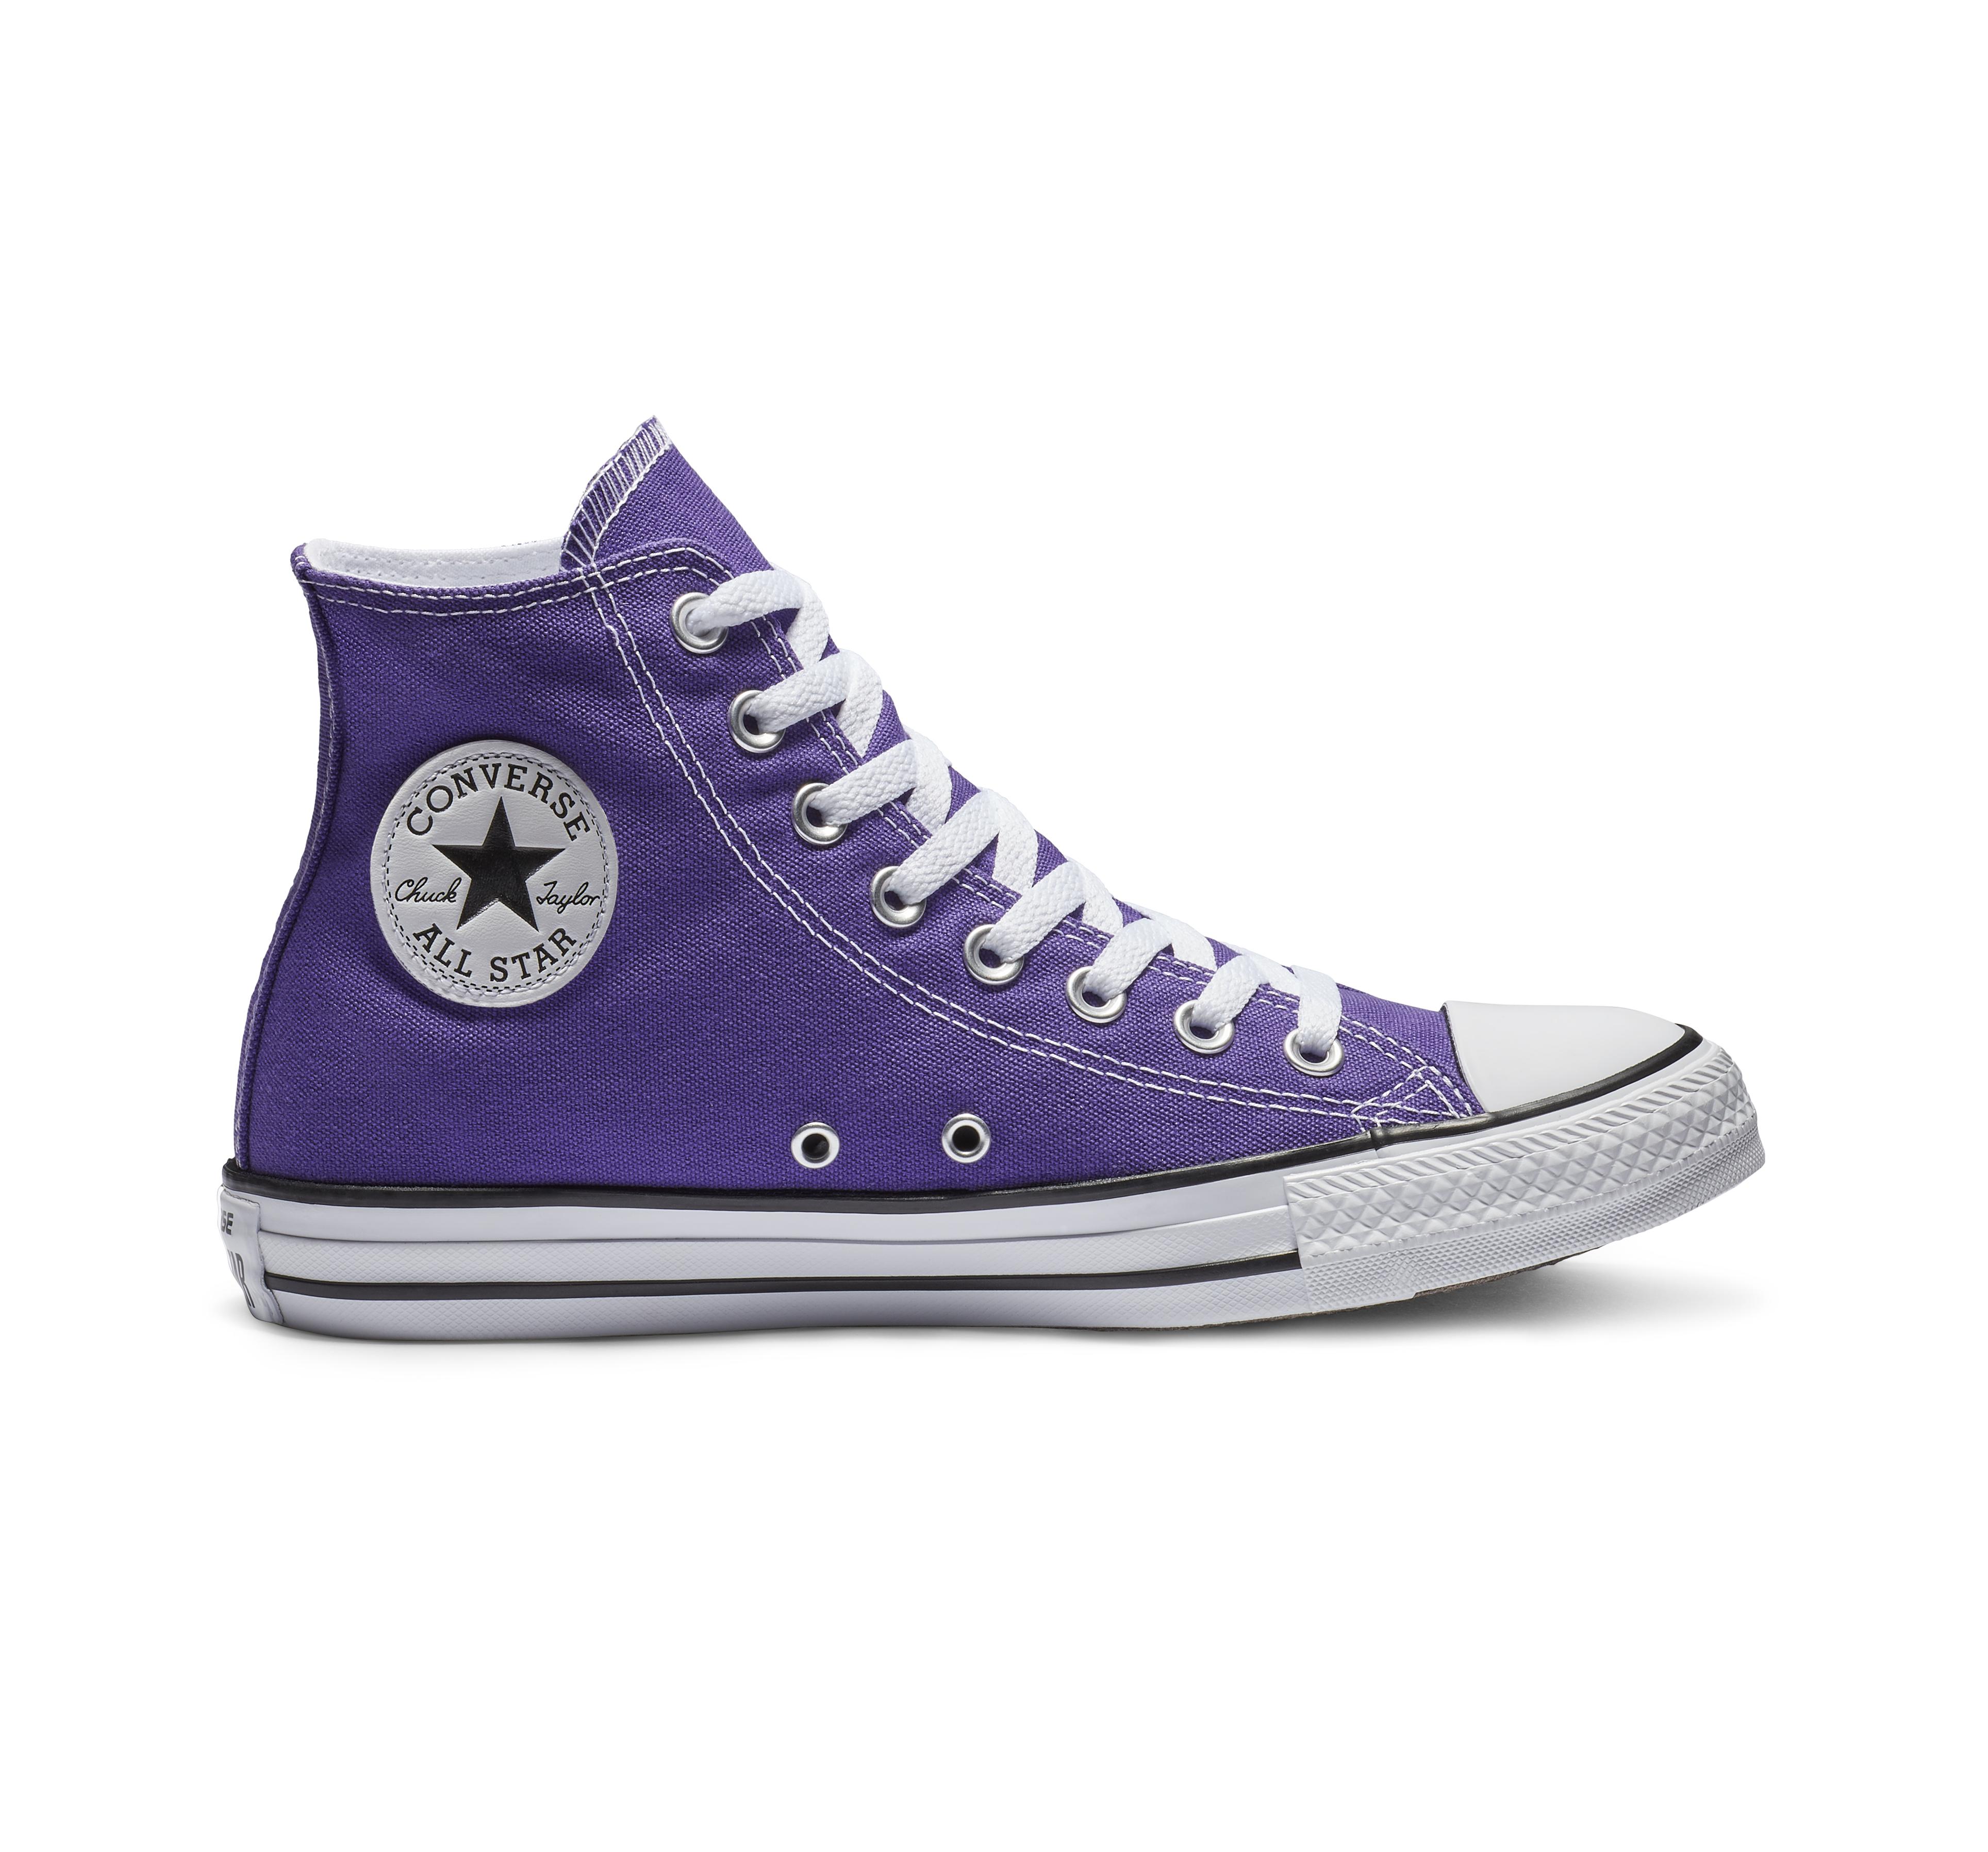 Converse Chuck Taylor All Star High Top In Violet Purple For Men Lyst